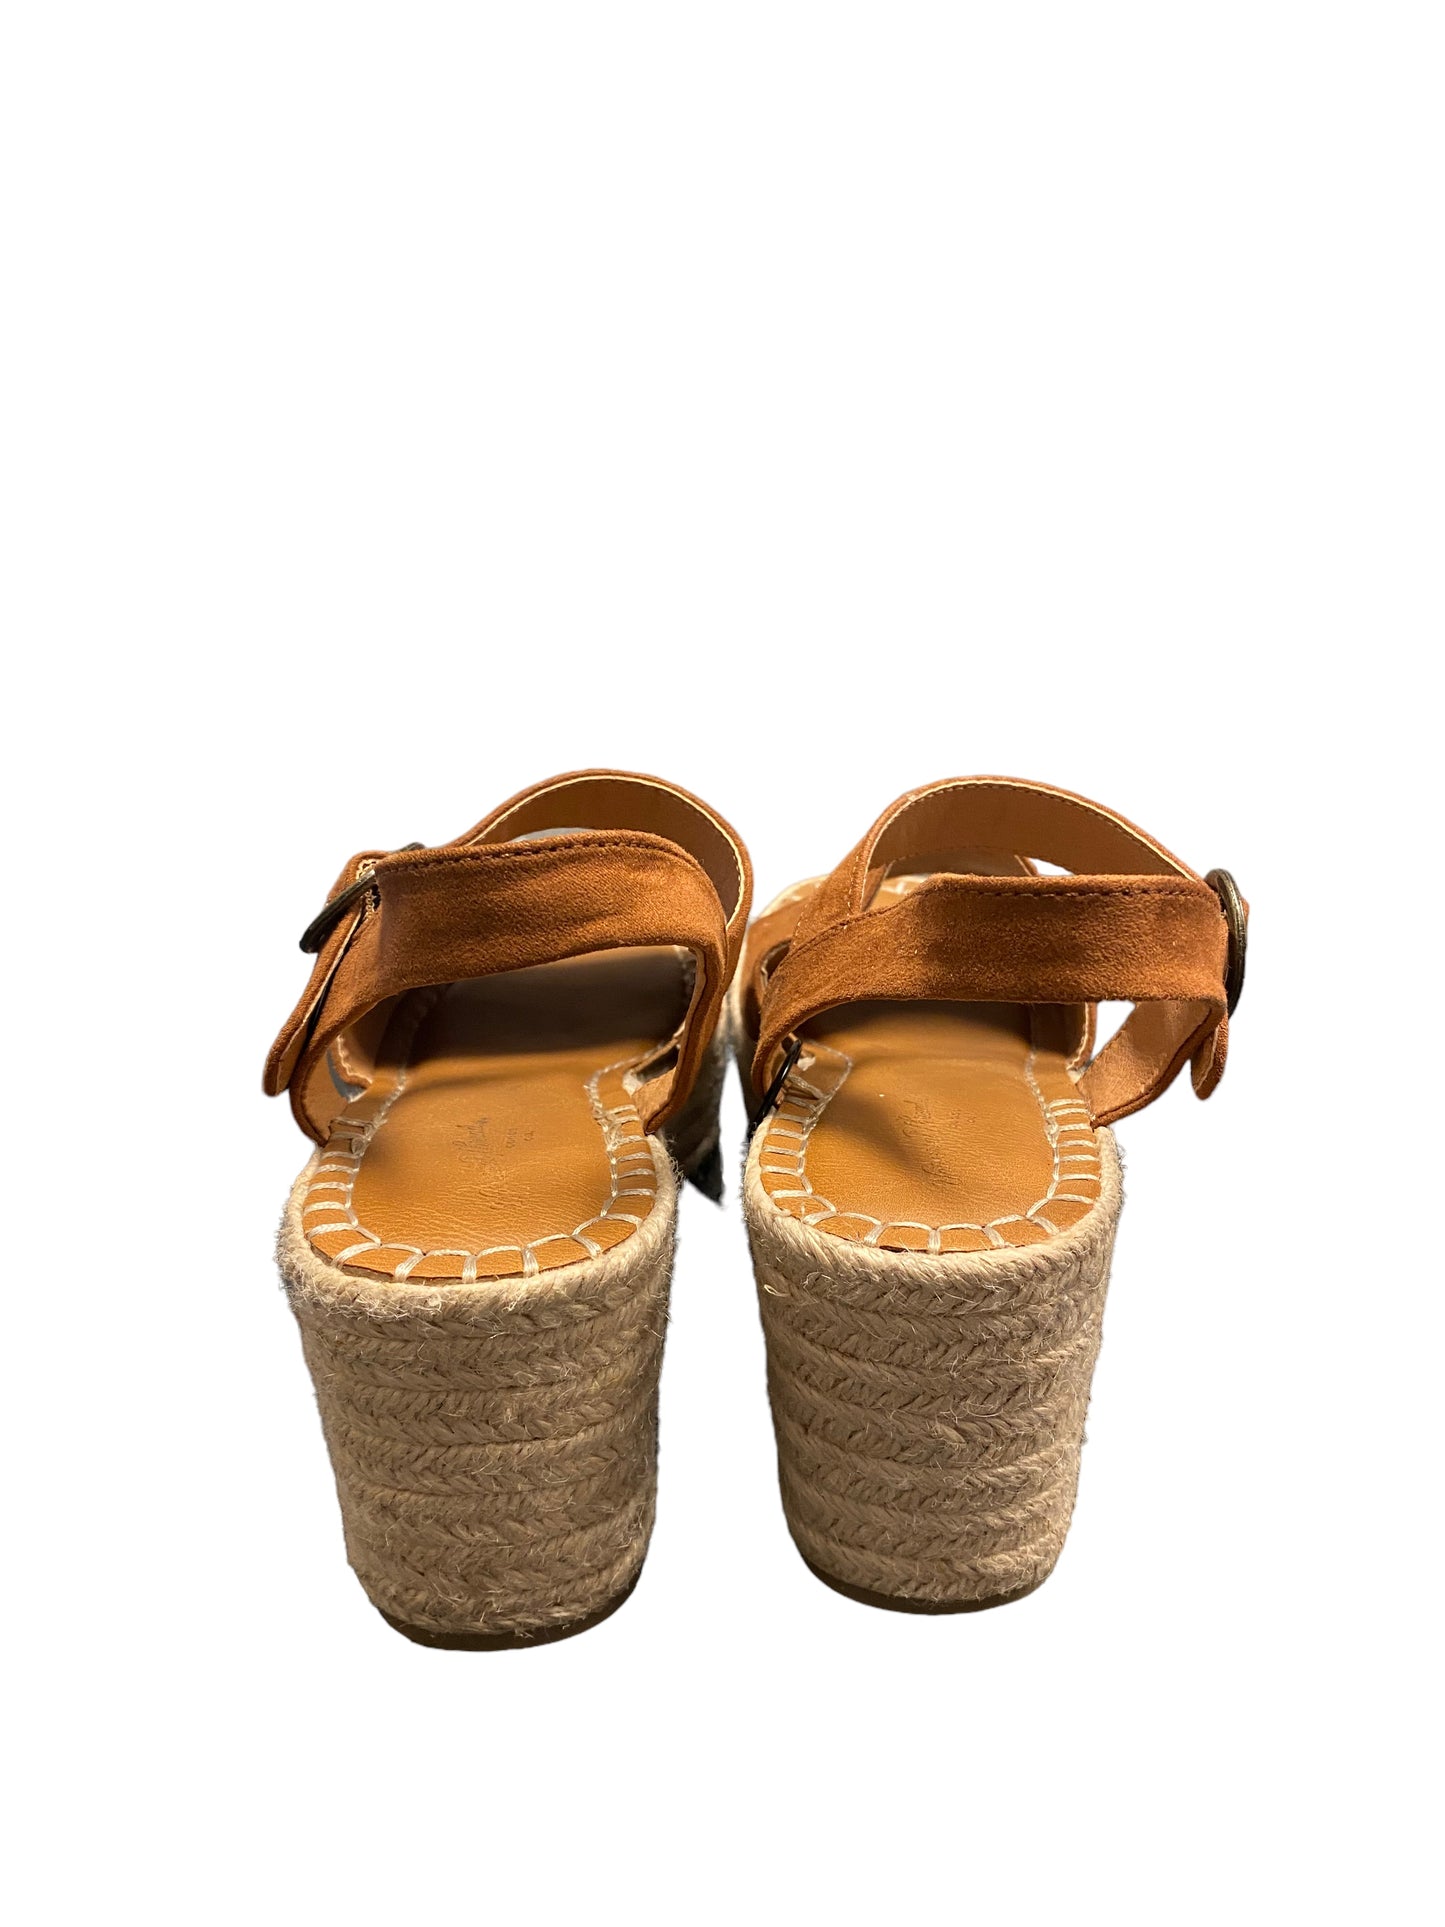 Sandals Heels Wedge By Universal Thread  Size: 7.5